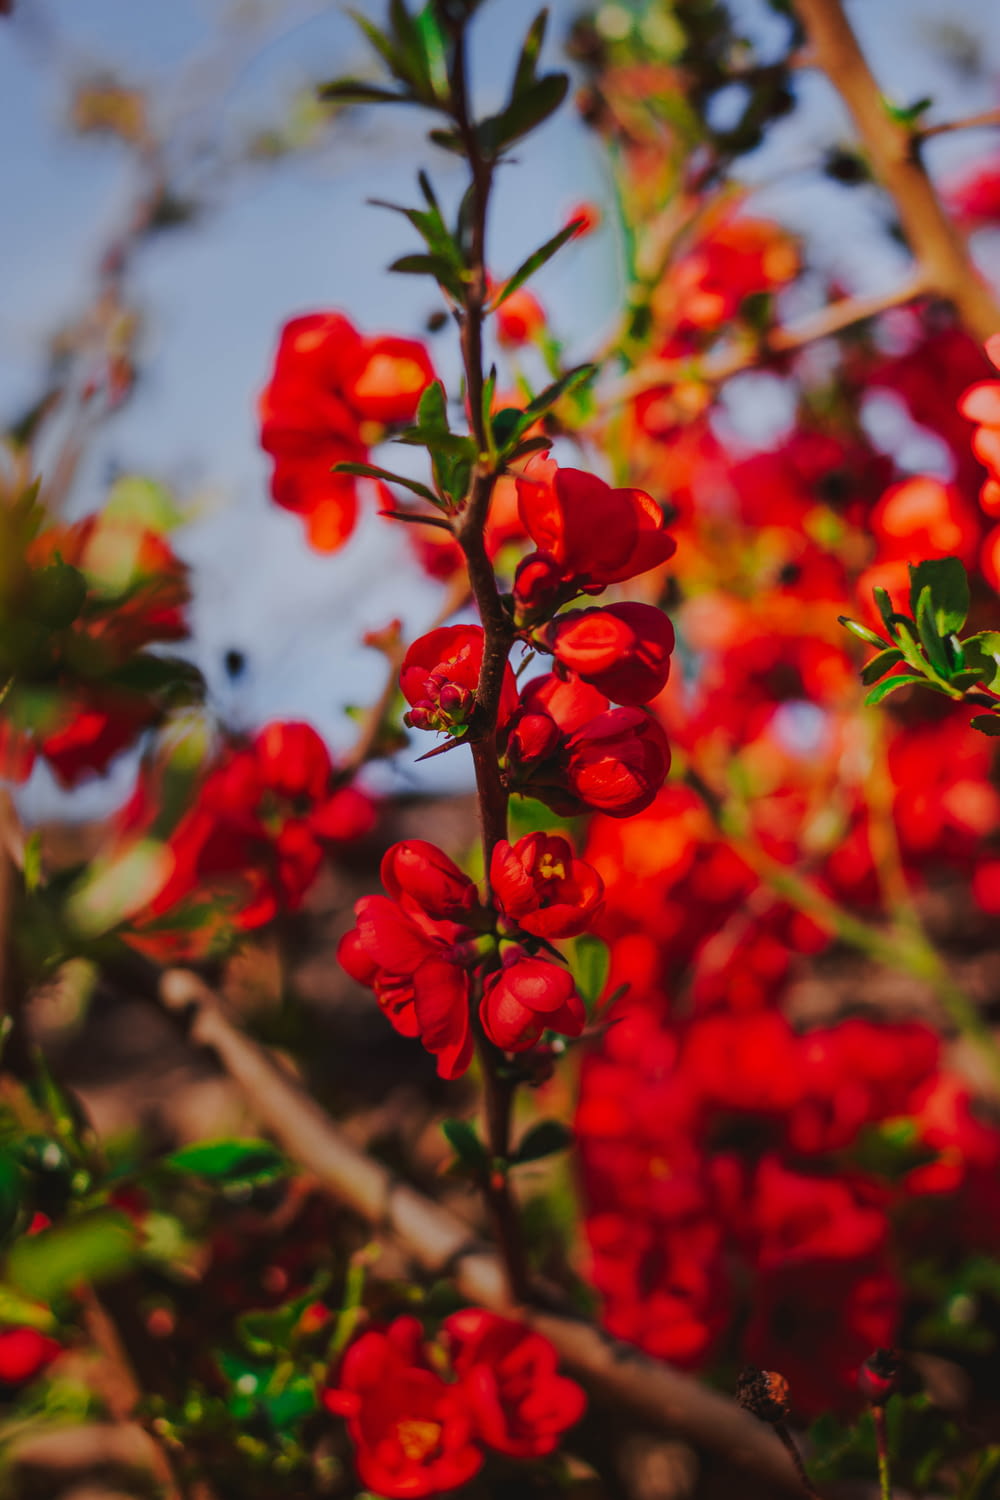 red petaled flowers in close-up photo